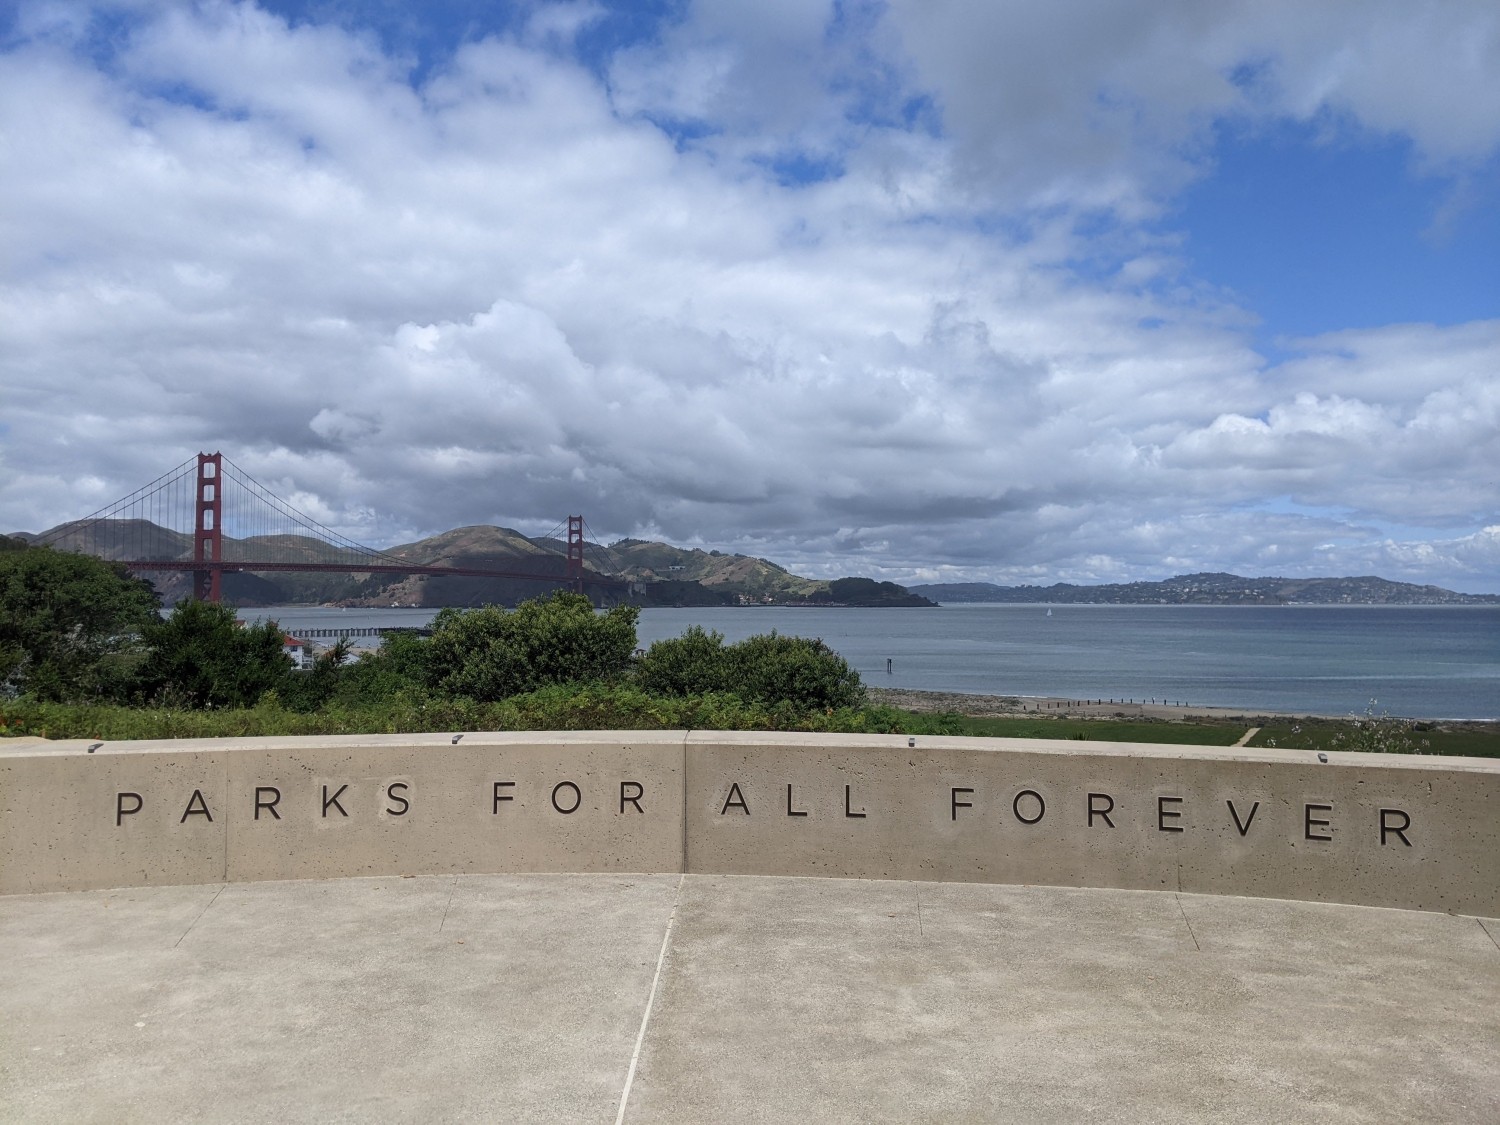 View of Golden Gate Bridget and water in background, with seating area that read 'parks for all forever'